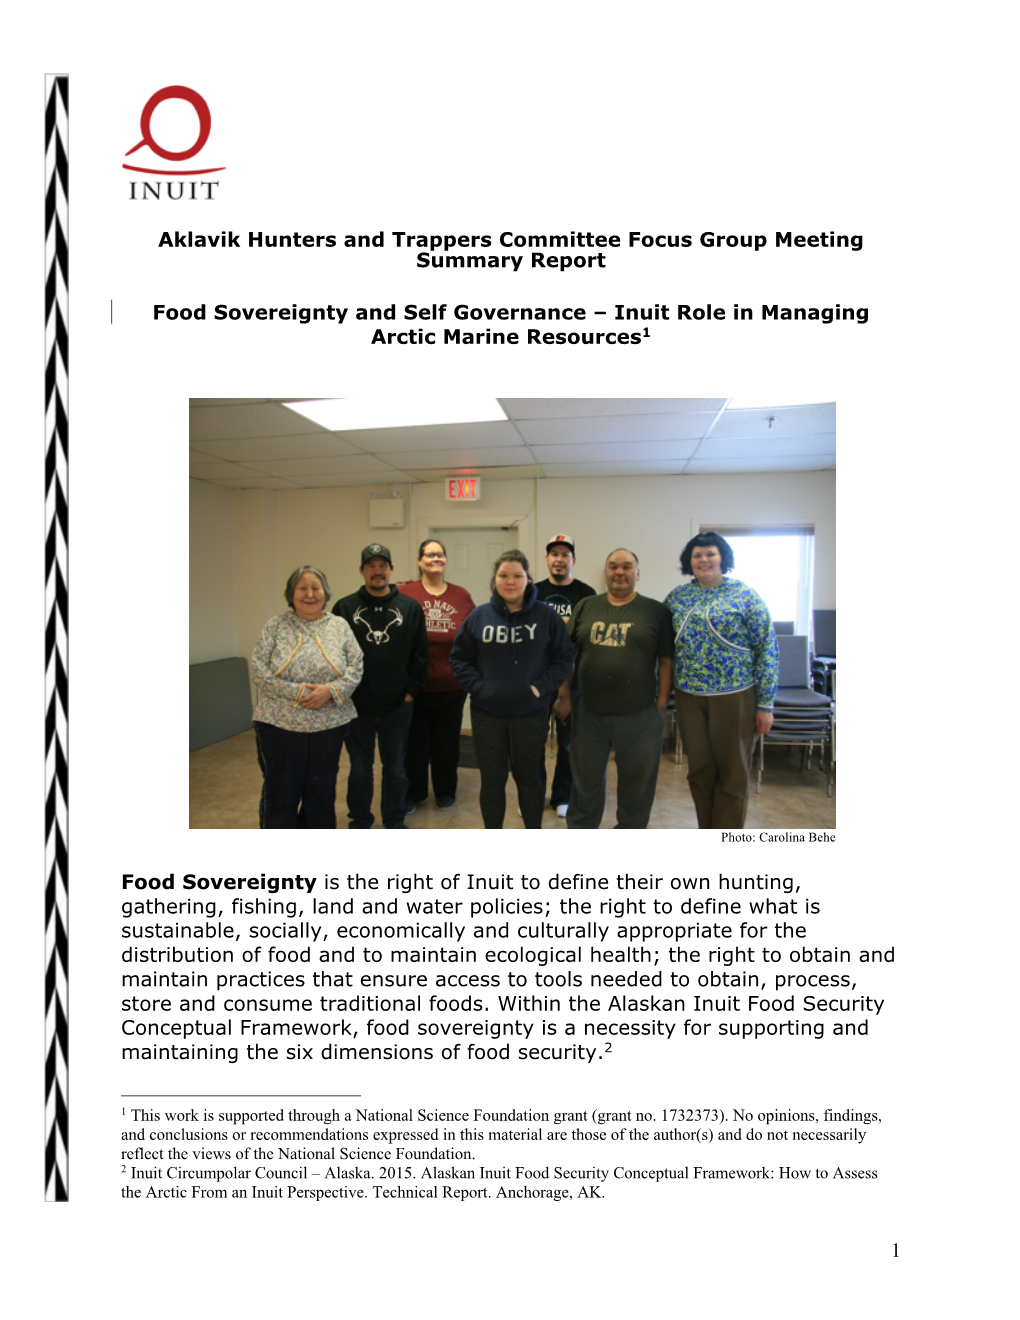 Aklavik Hunters and Trappers Committee Focus Group Summary